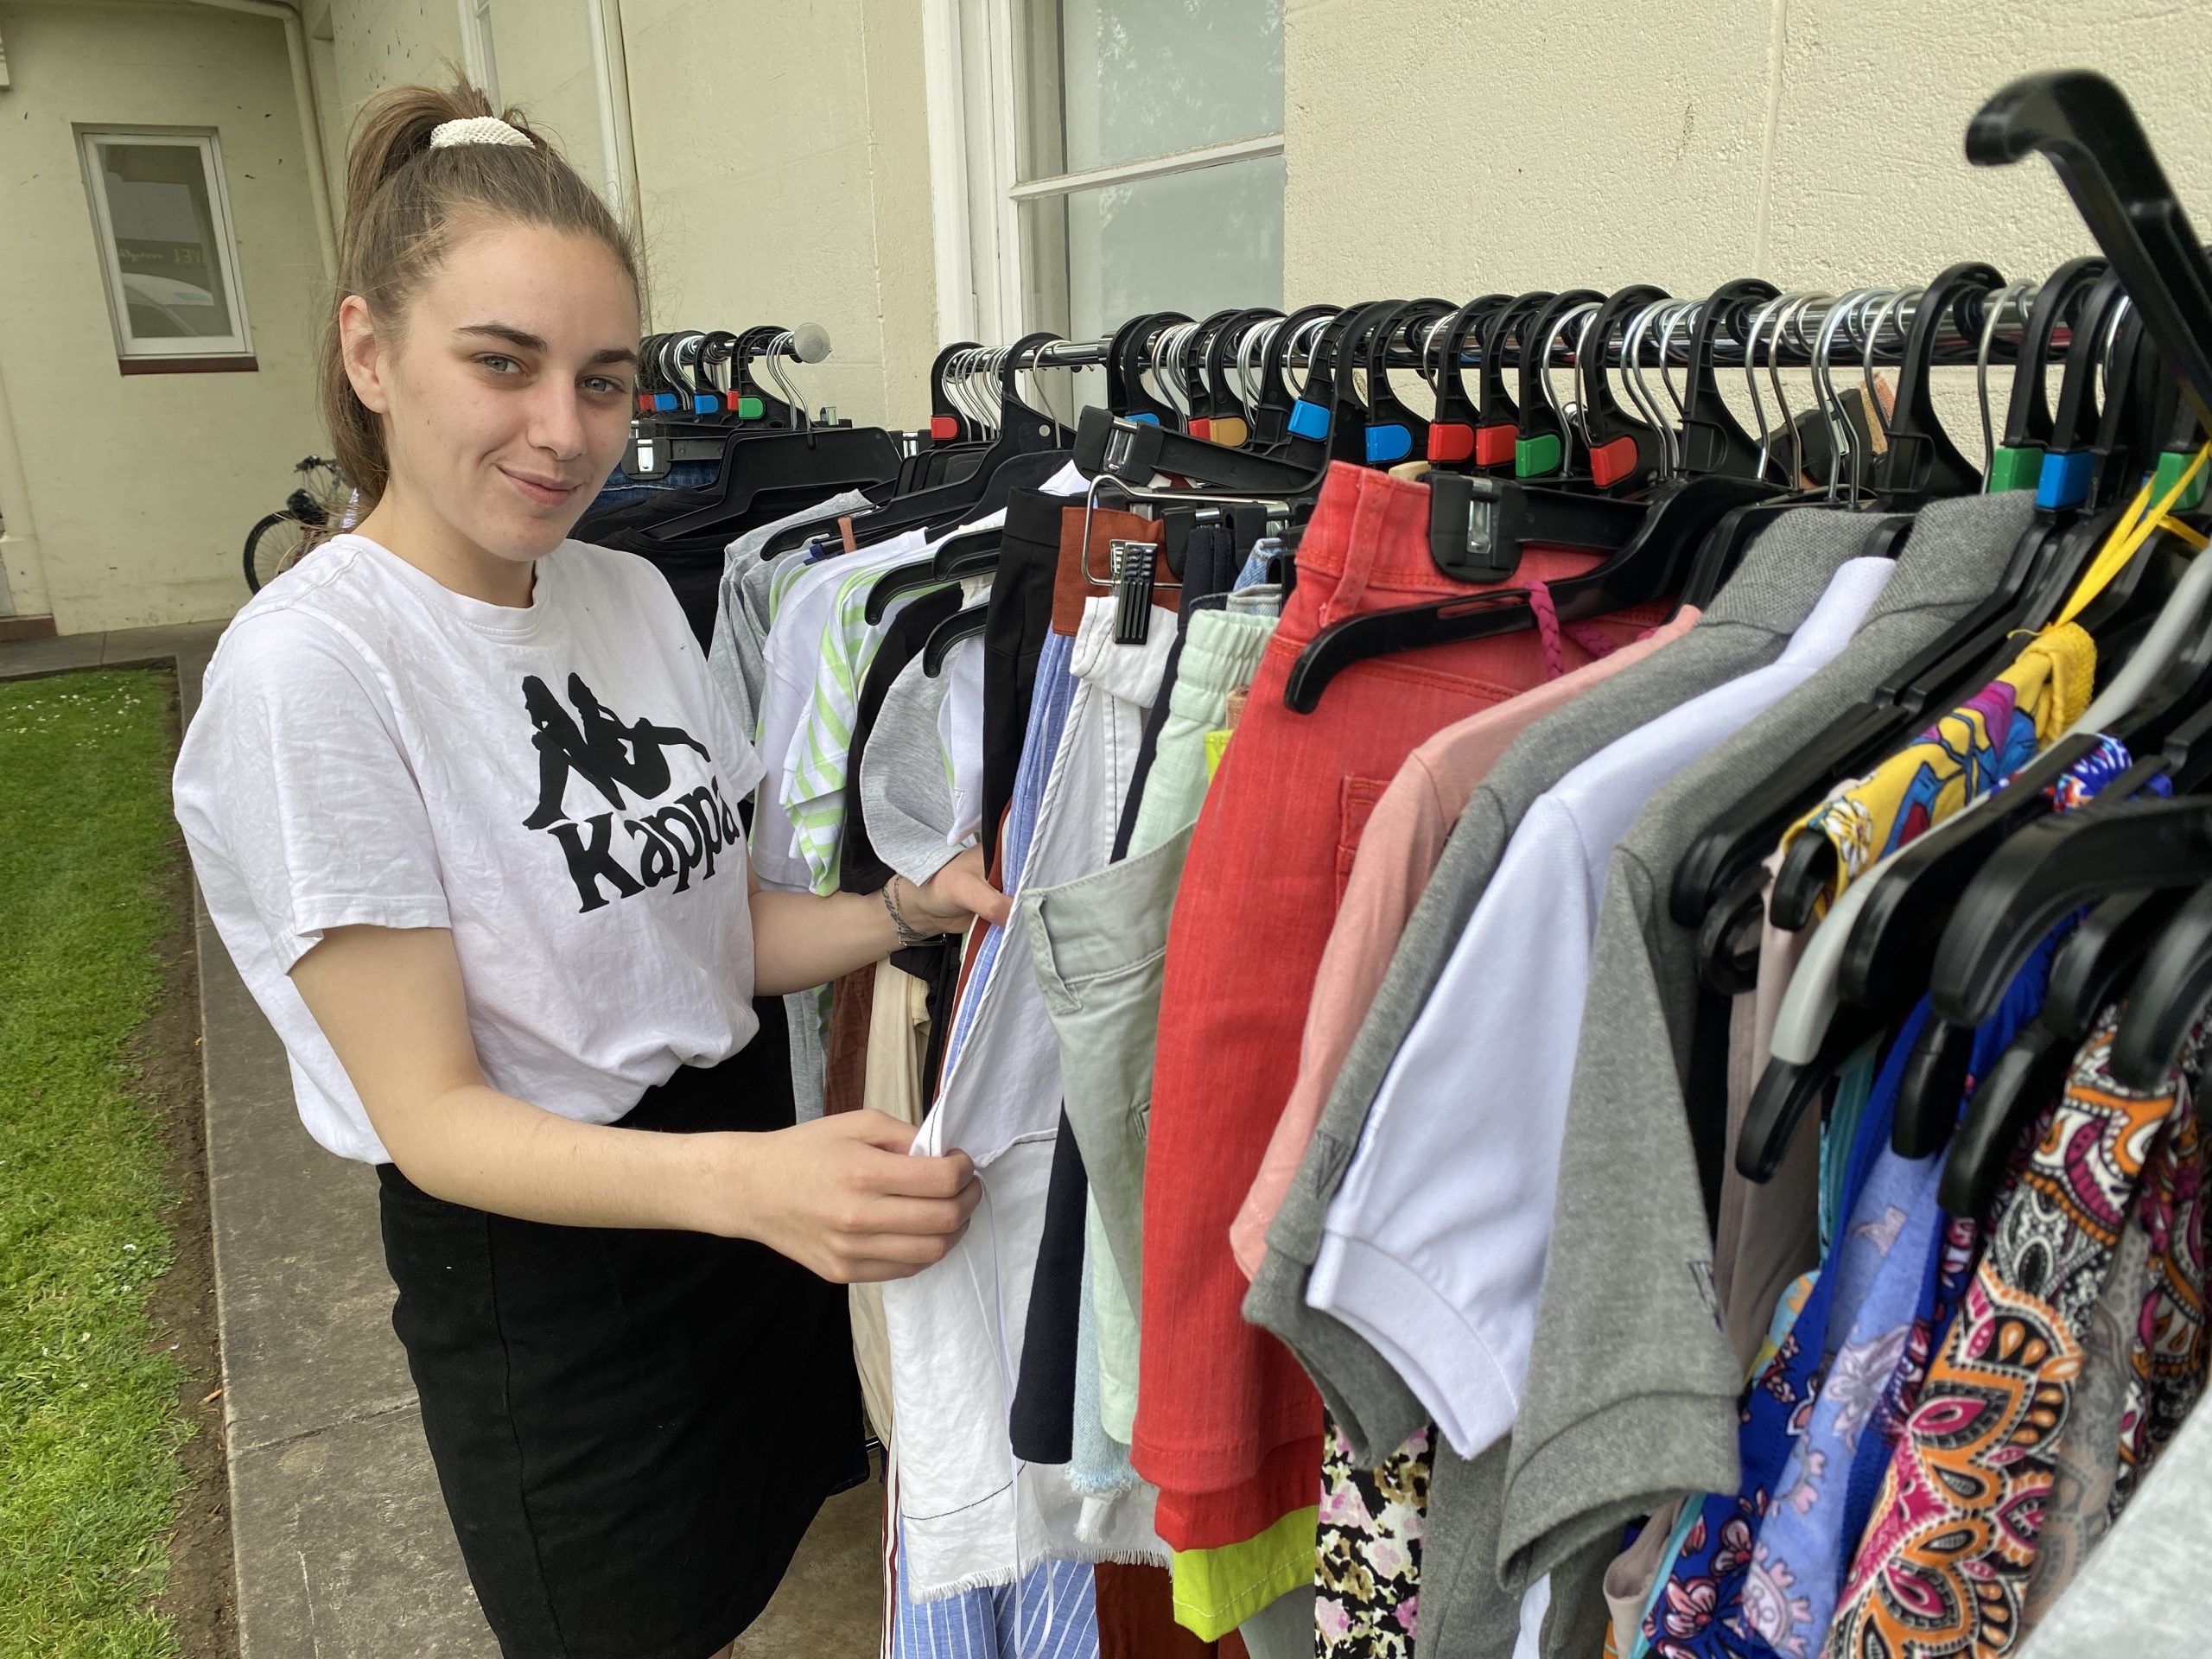 PLENTY OF OPTIONS: Kym looks through the donated clothing on offer thanks to the visit by the Thread Together mobile clothing van.